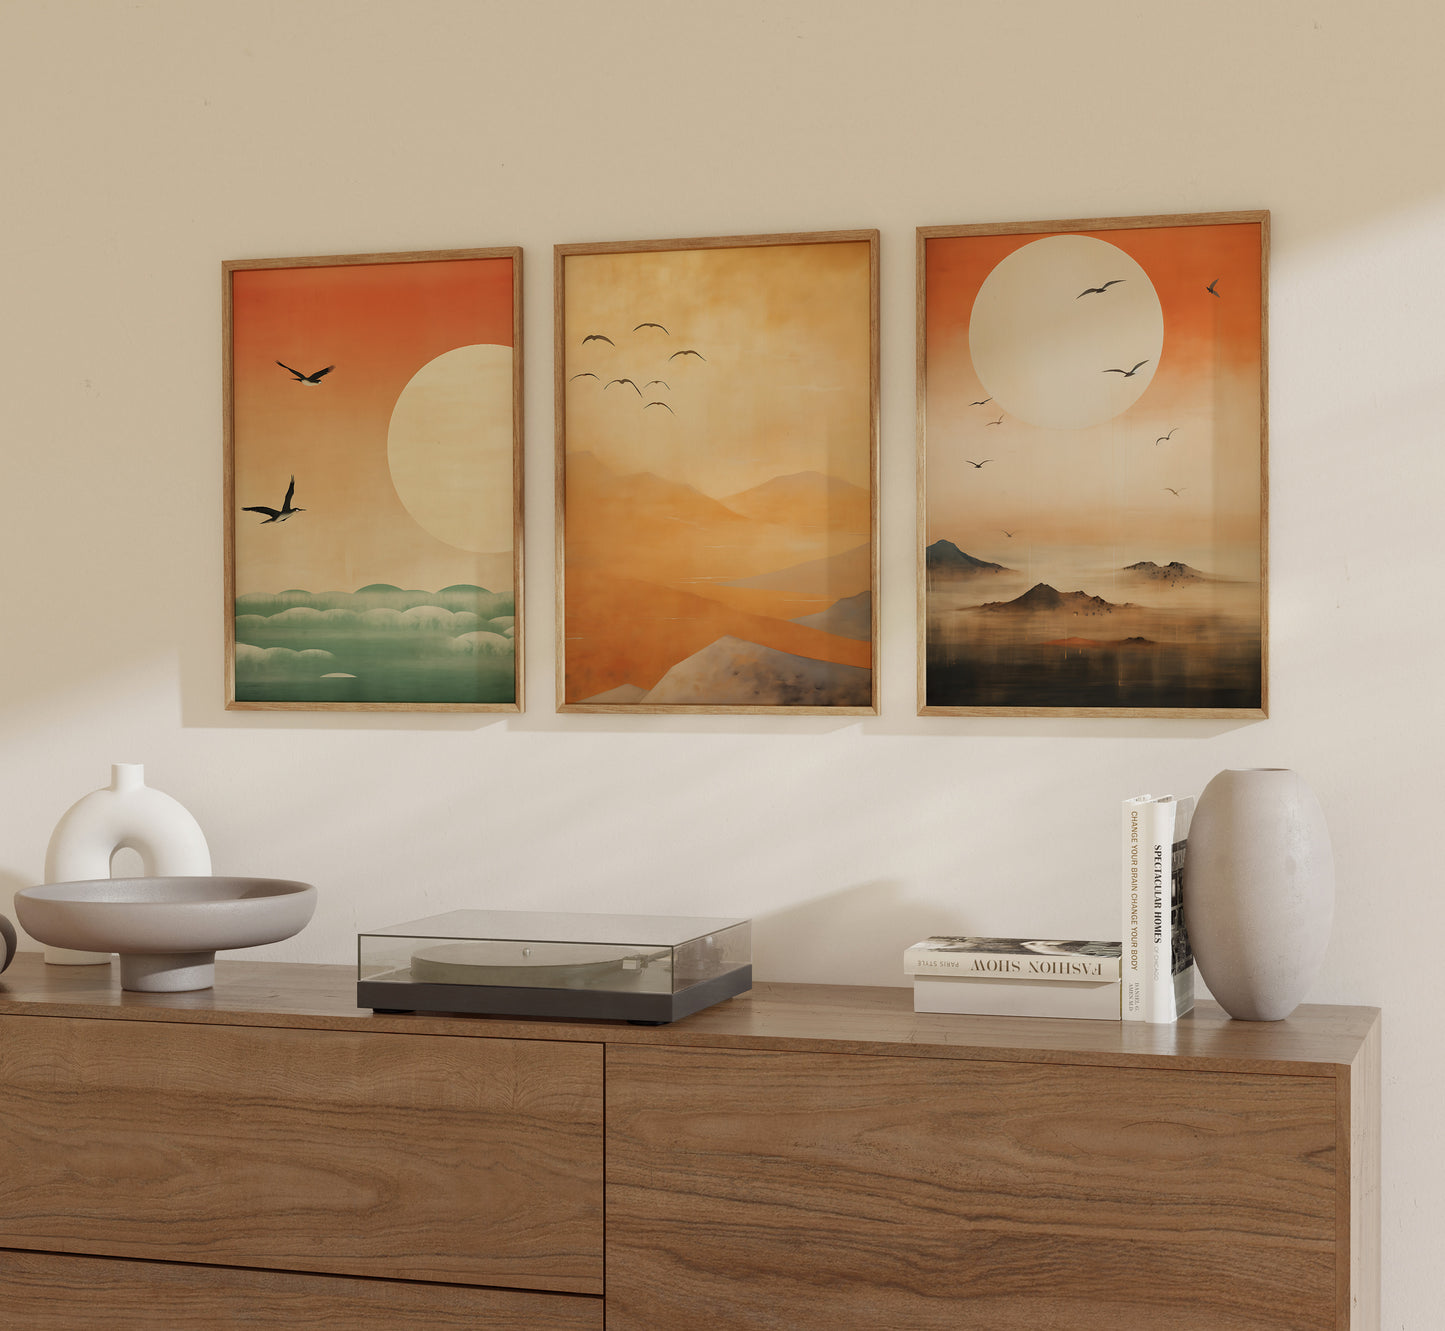 Three framed artworks of sunsets on a wall above a wooden sideboard with decorative items.